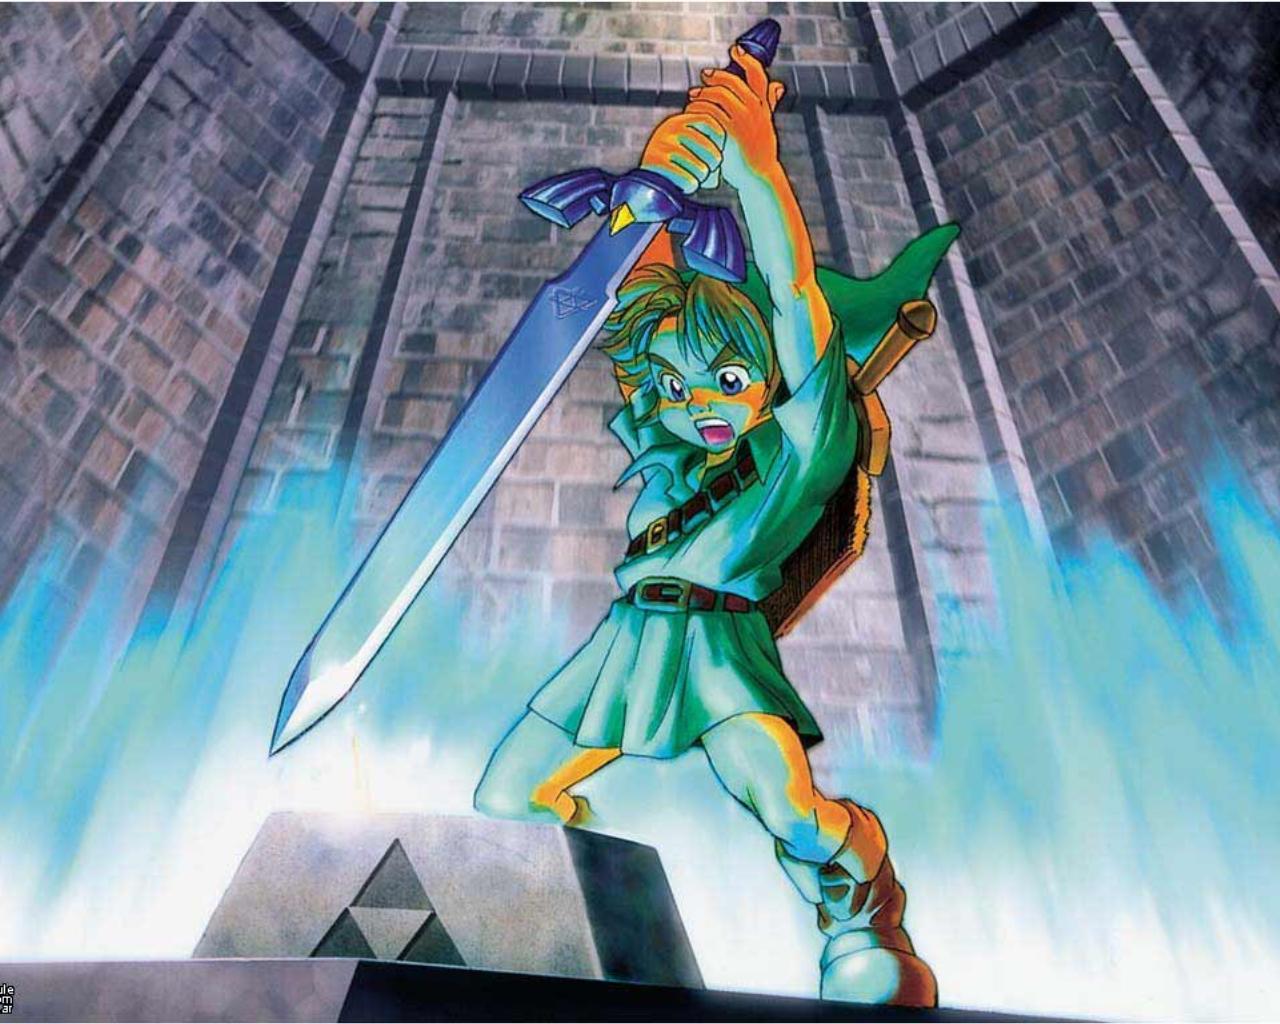 Ocarina Of Time Wallpaper HD Background